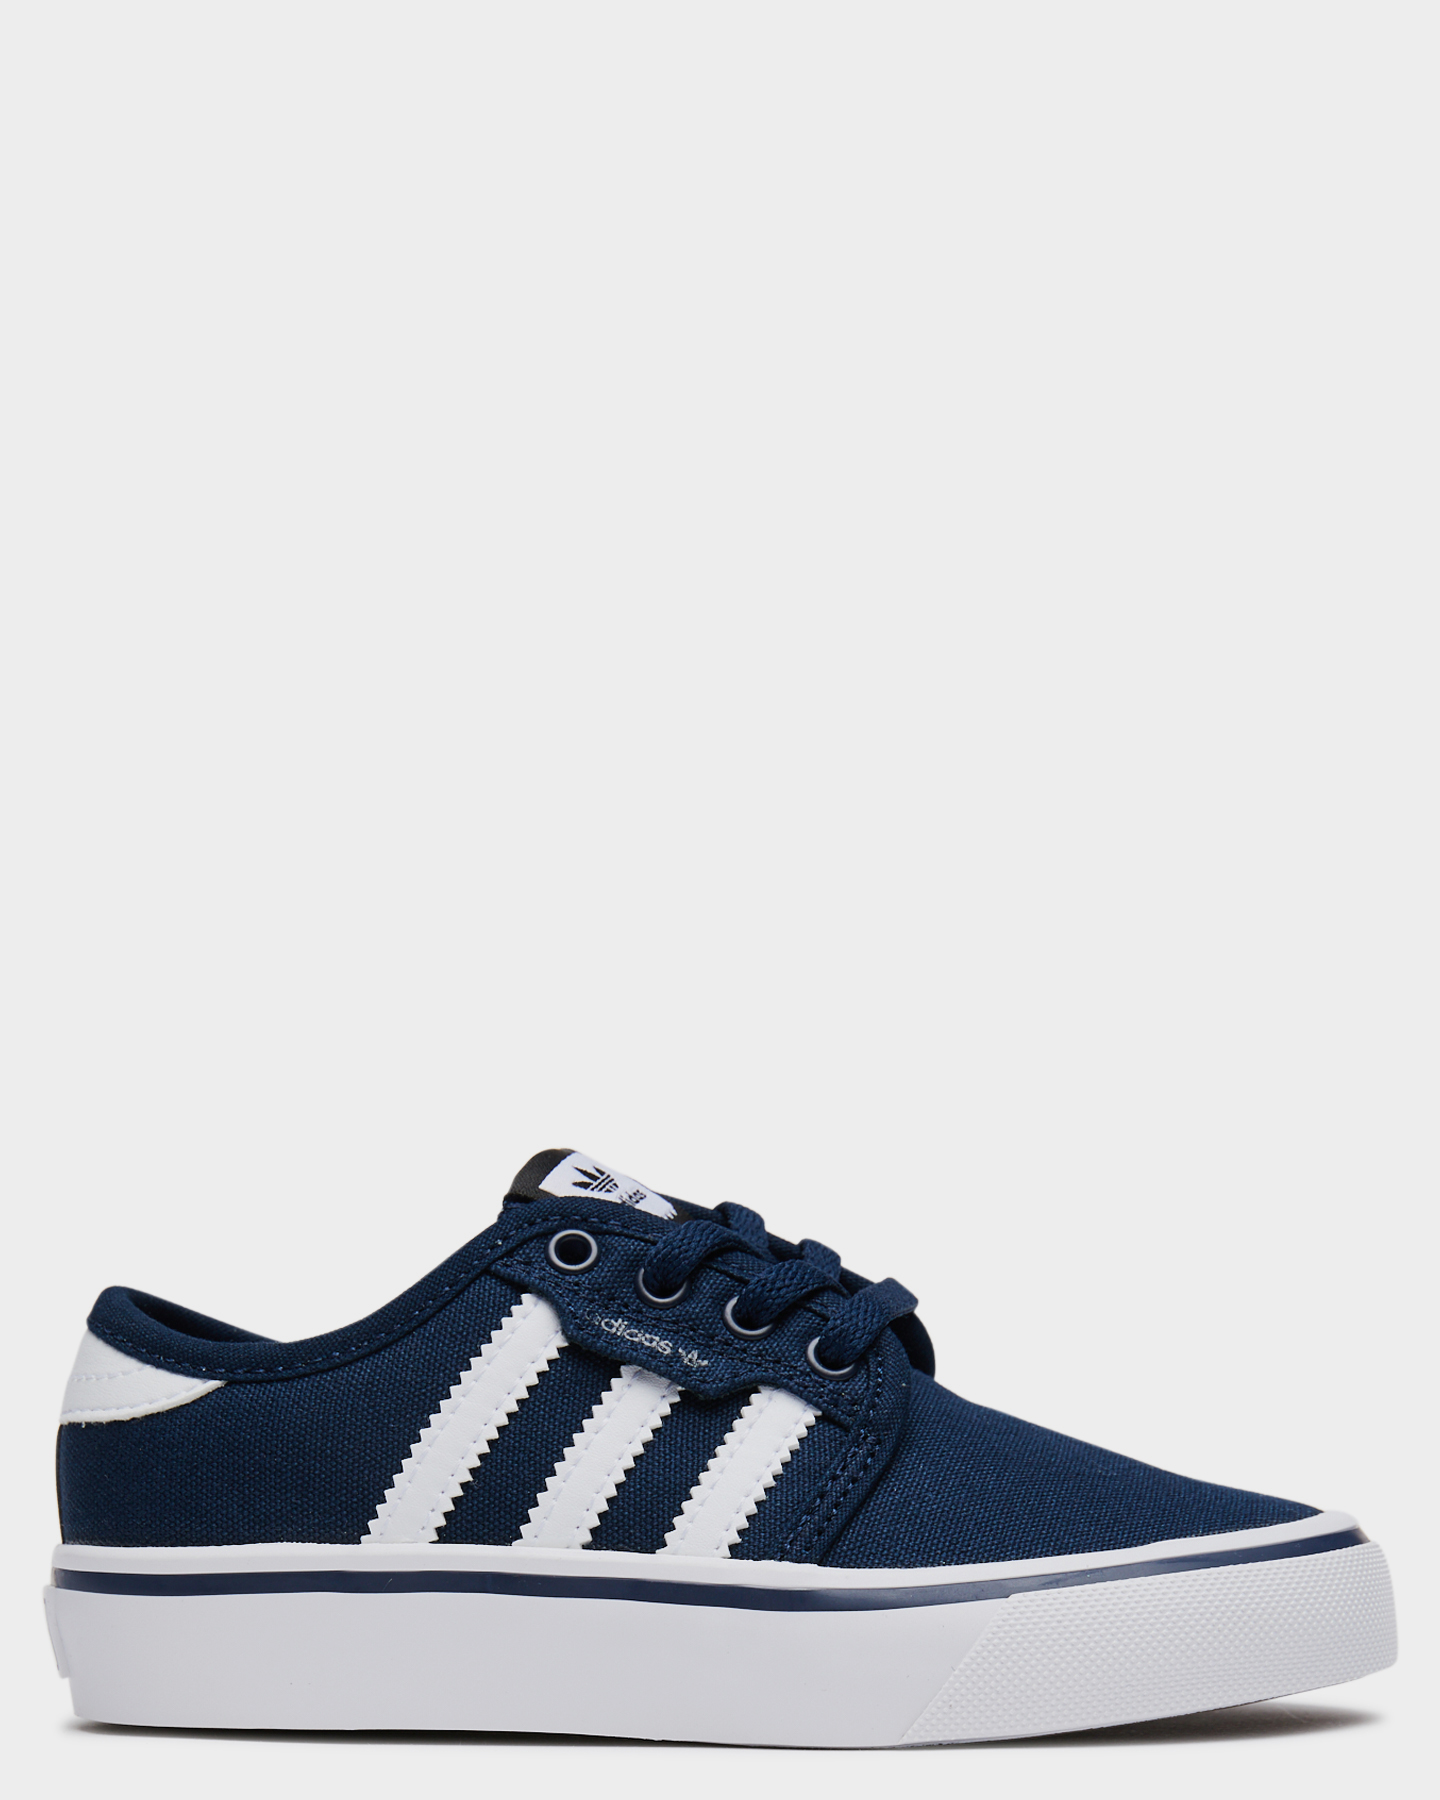 Adidas Seeley Shoe - Youth - Collegiate 